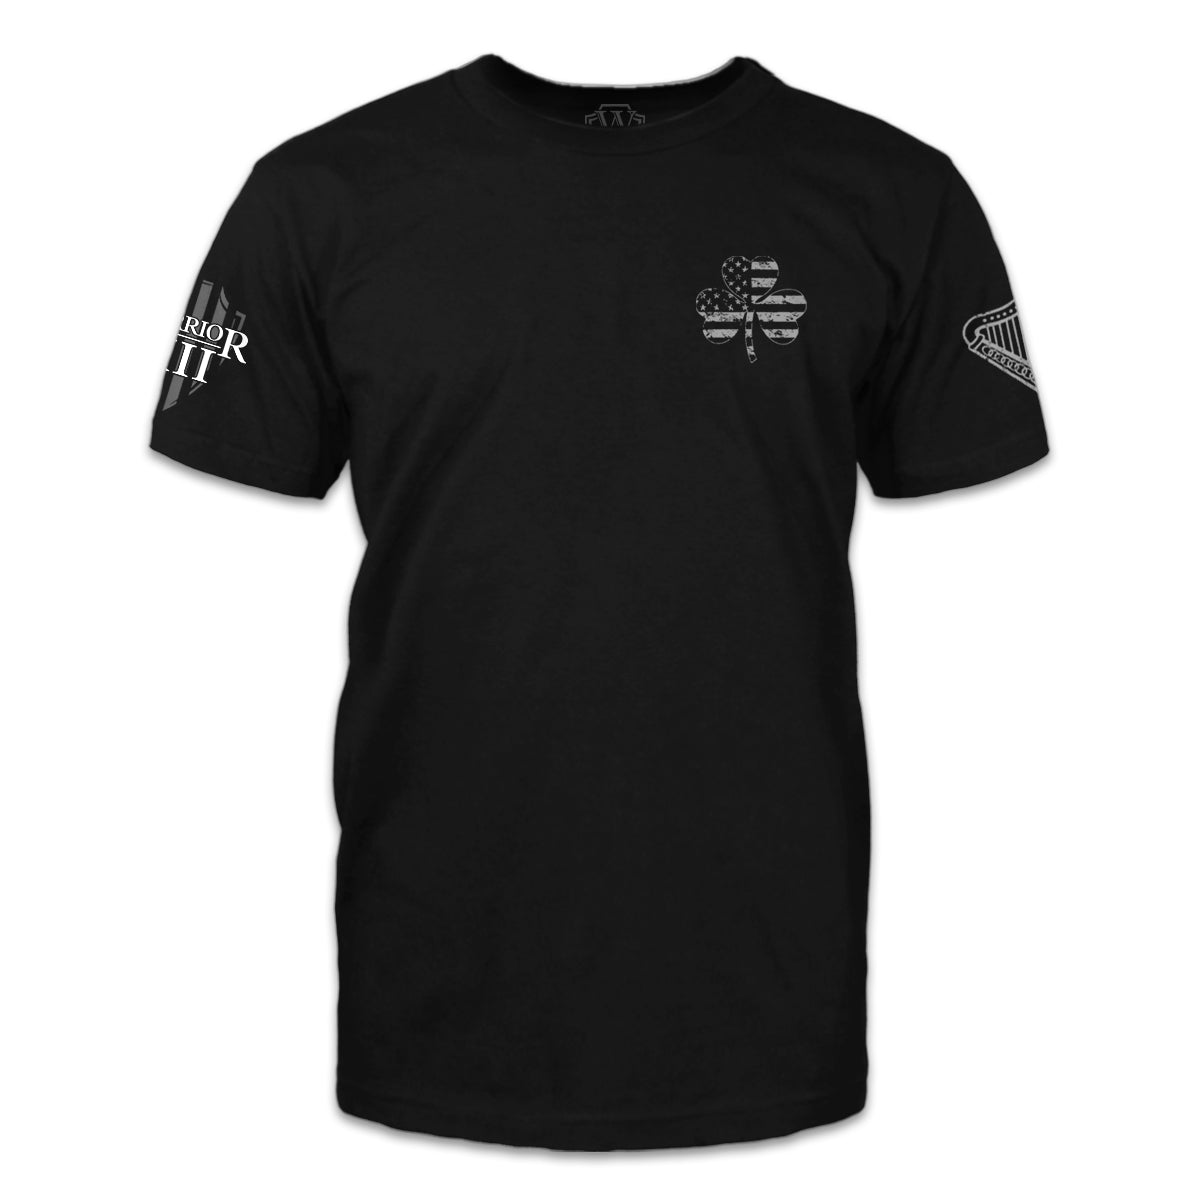 A black t-shirt with a clover printed on the front of the shirt.